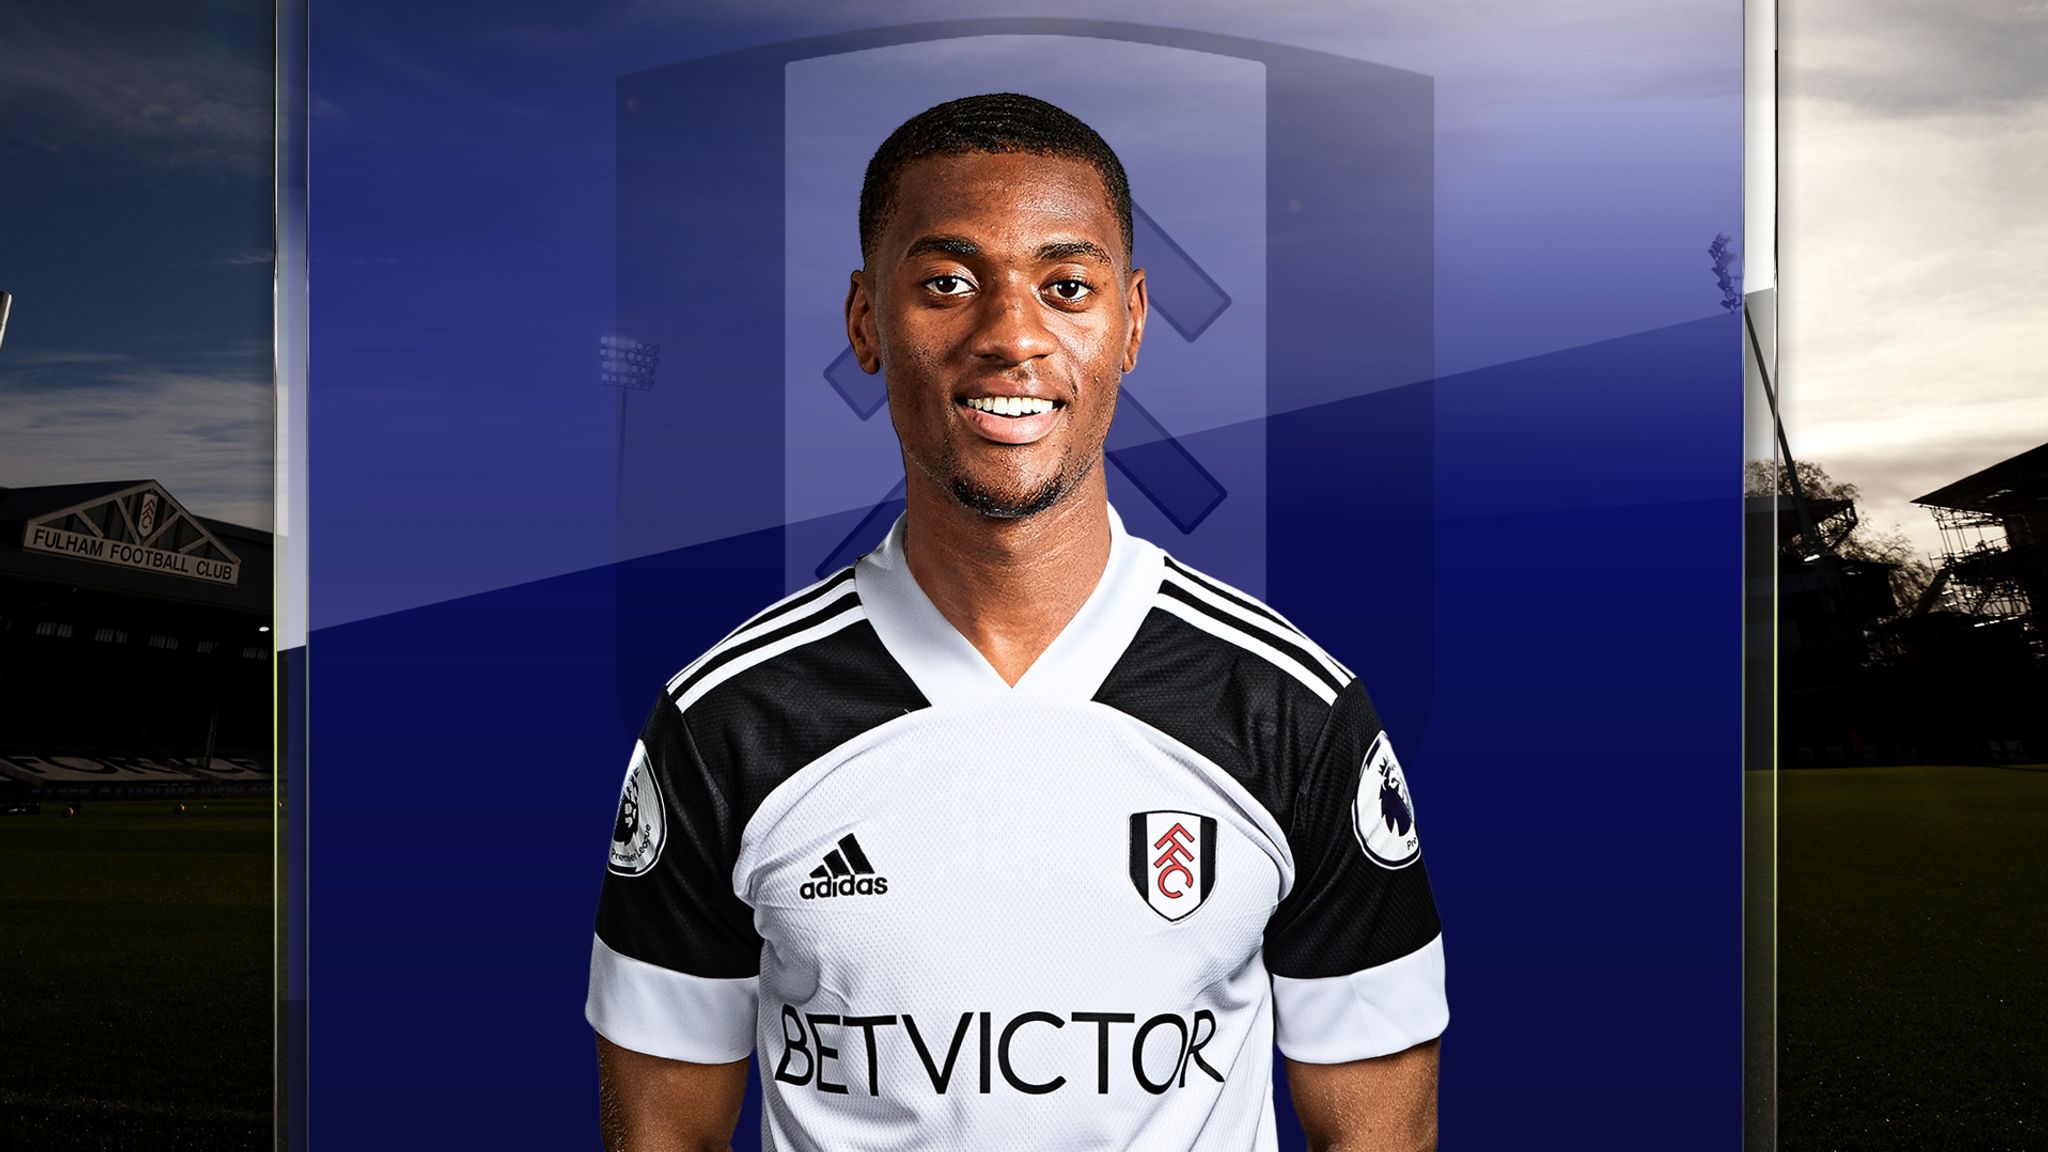 Tosin Adarabioyo Age, Salary, Net worth, Current Teams, Career, Height, and much more